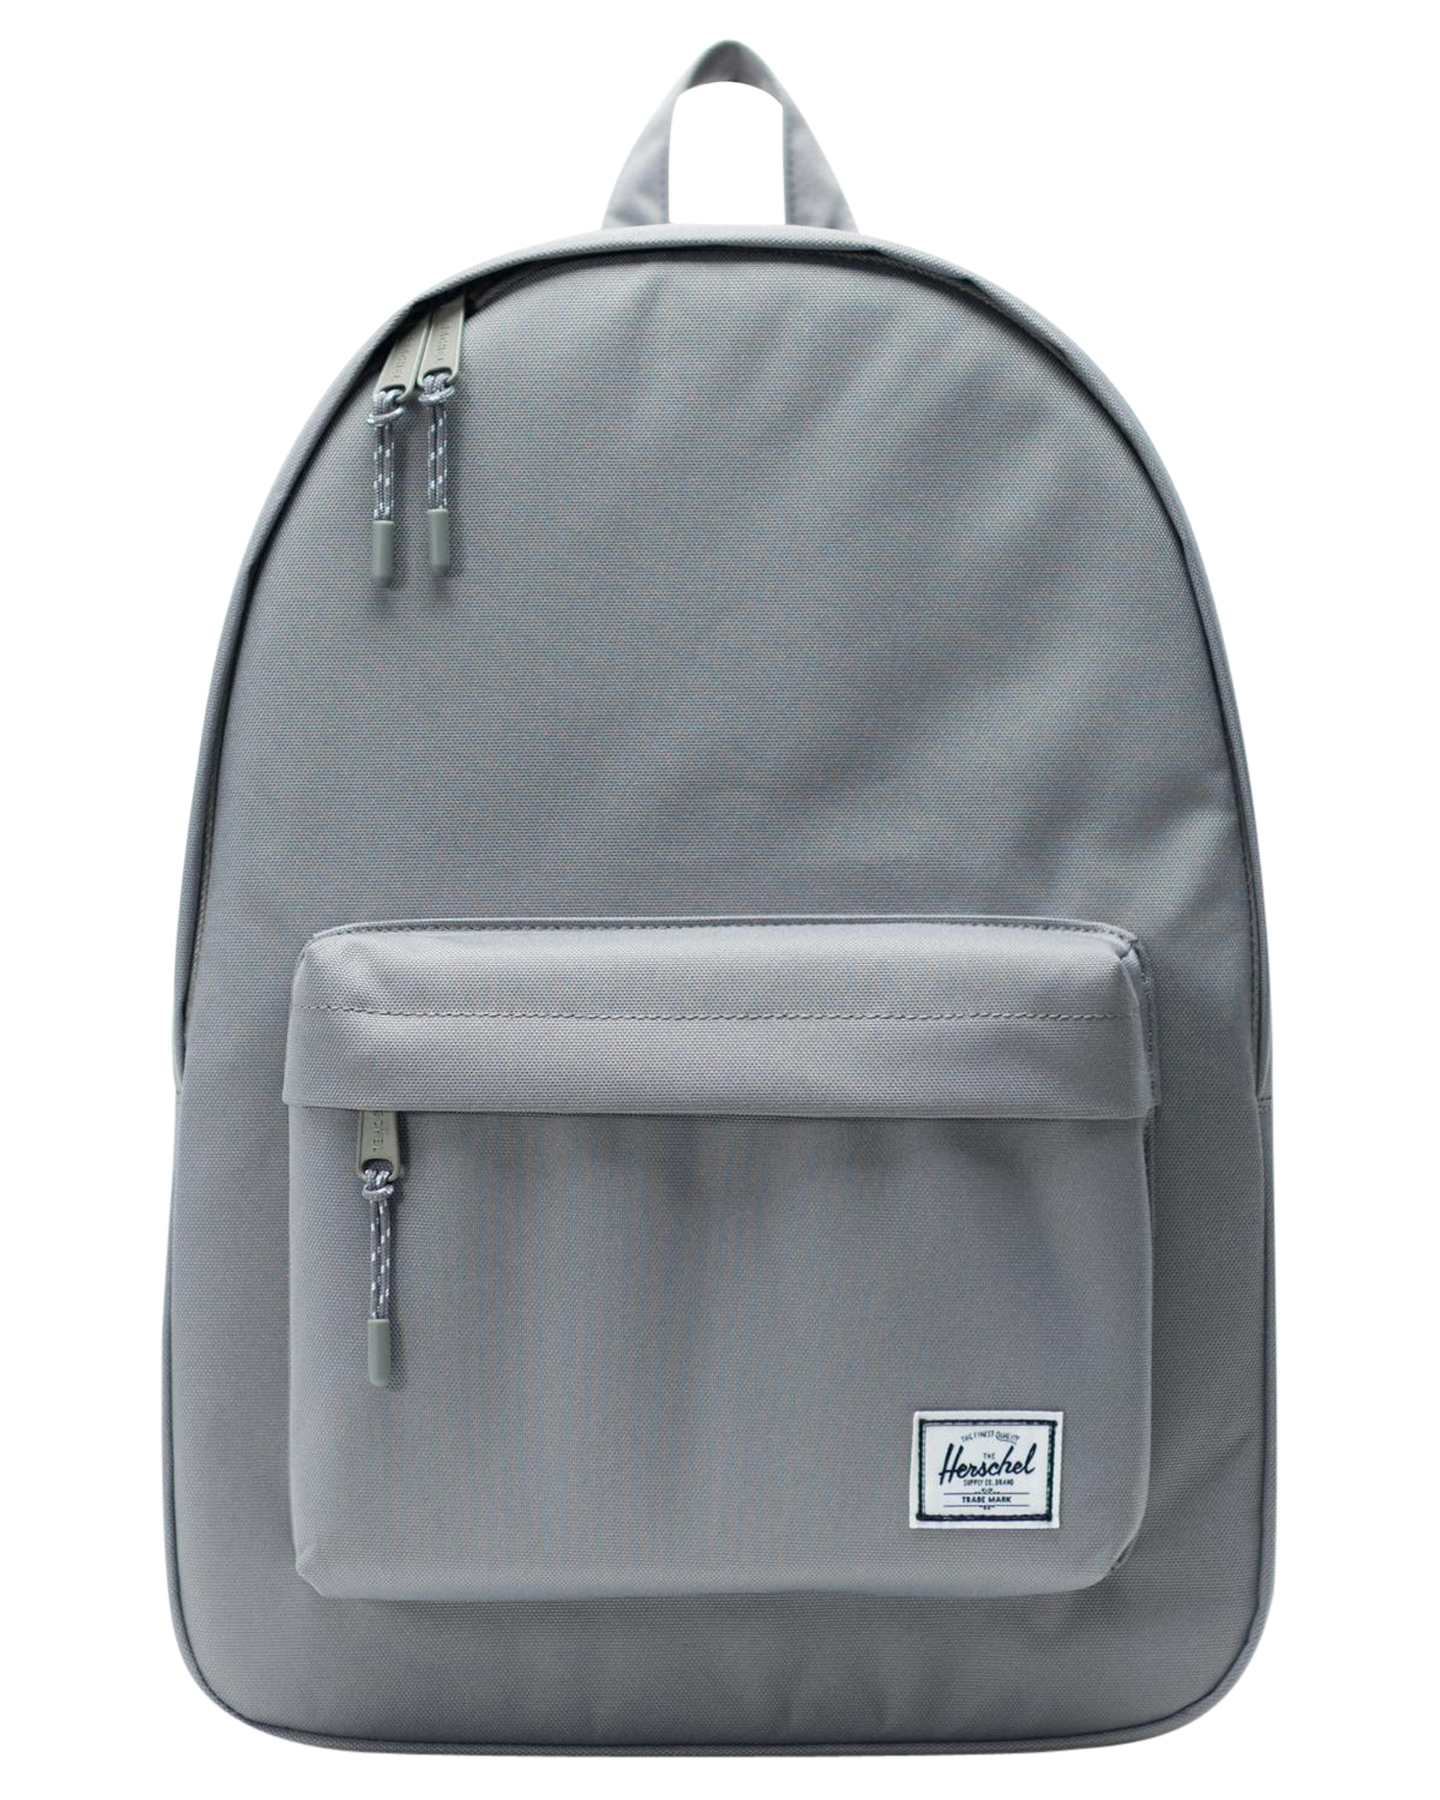 Herschel Supply Co Classic 24L Backpack - Grey | SurfStitch